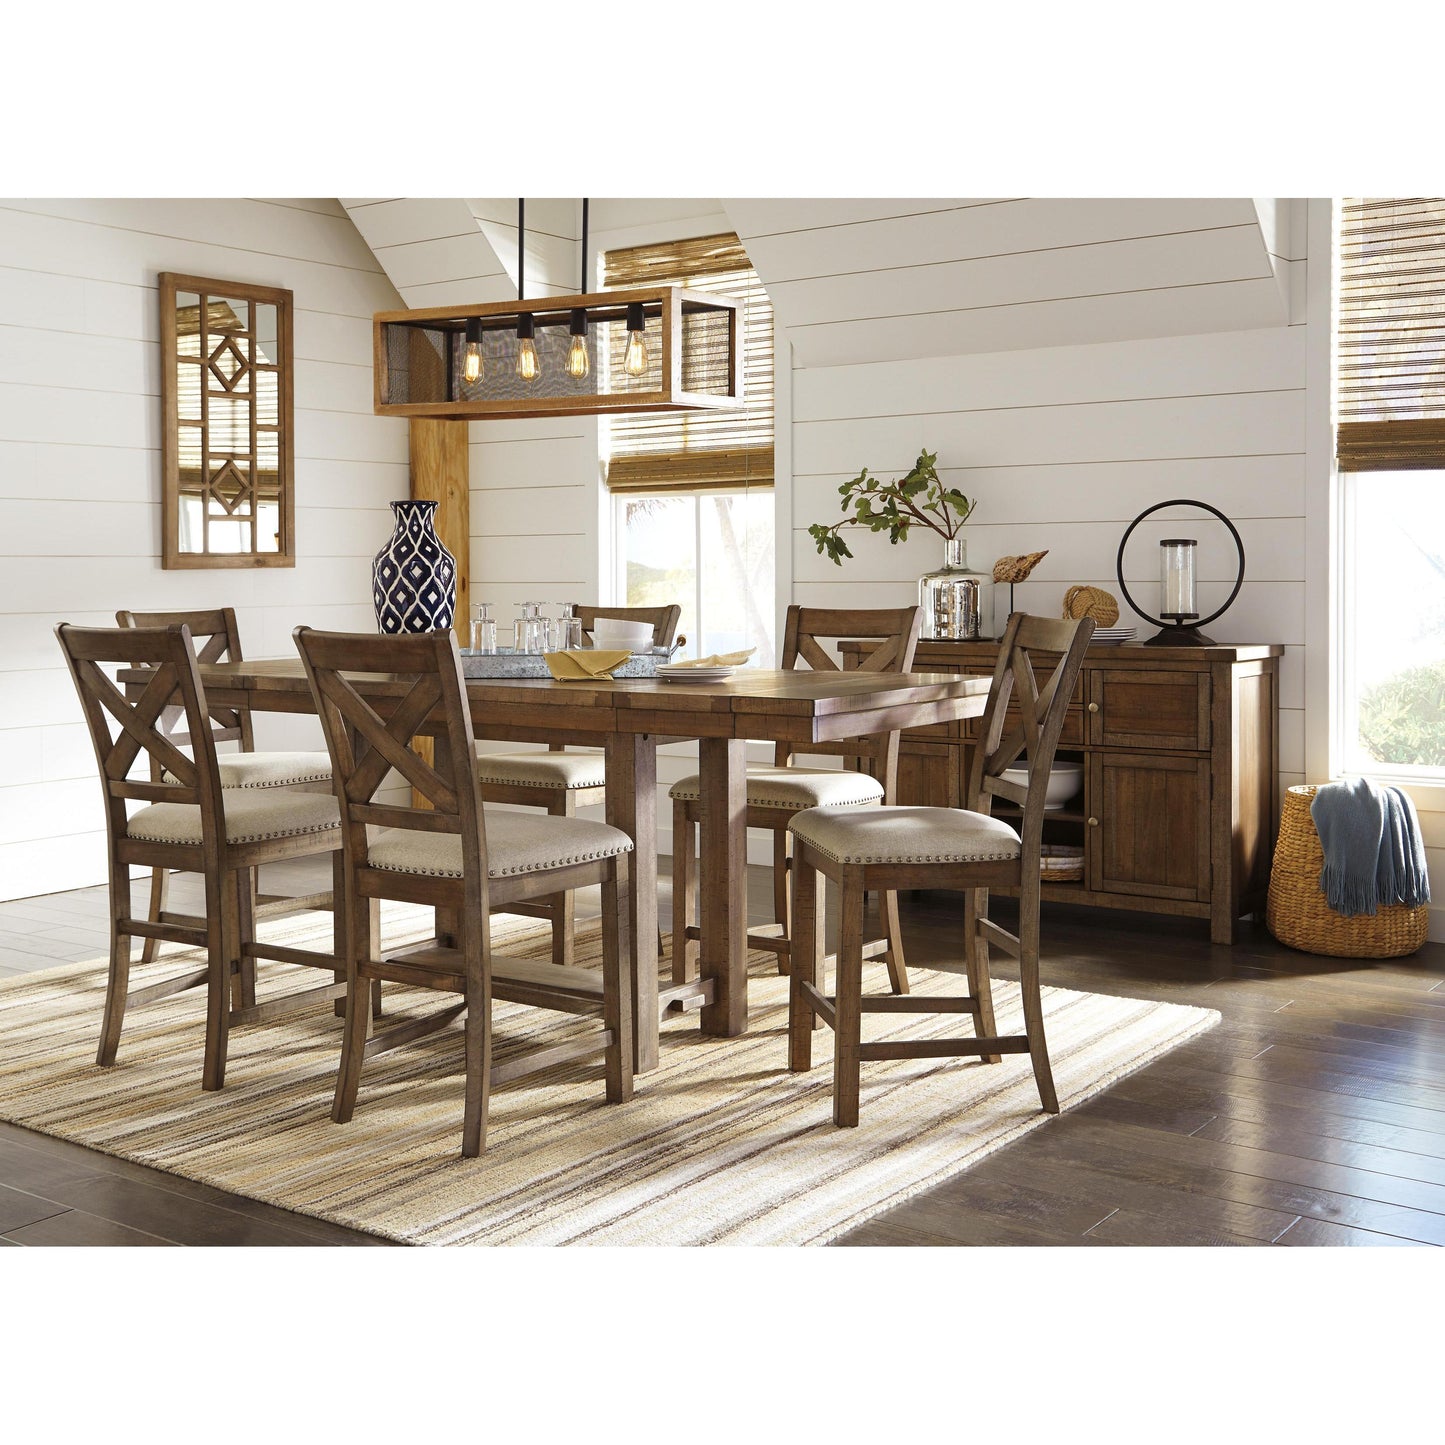 Signature Design by Ashley Moriville D631 5 pc Counter Height Dining Set IMAGE 1